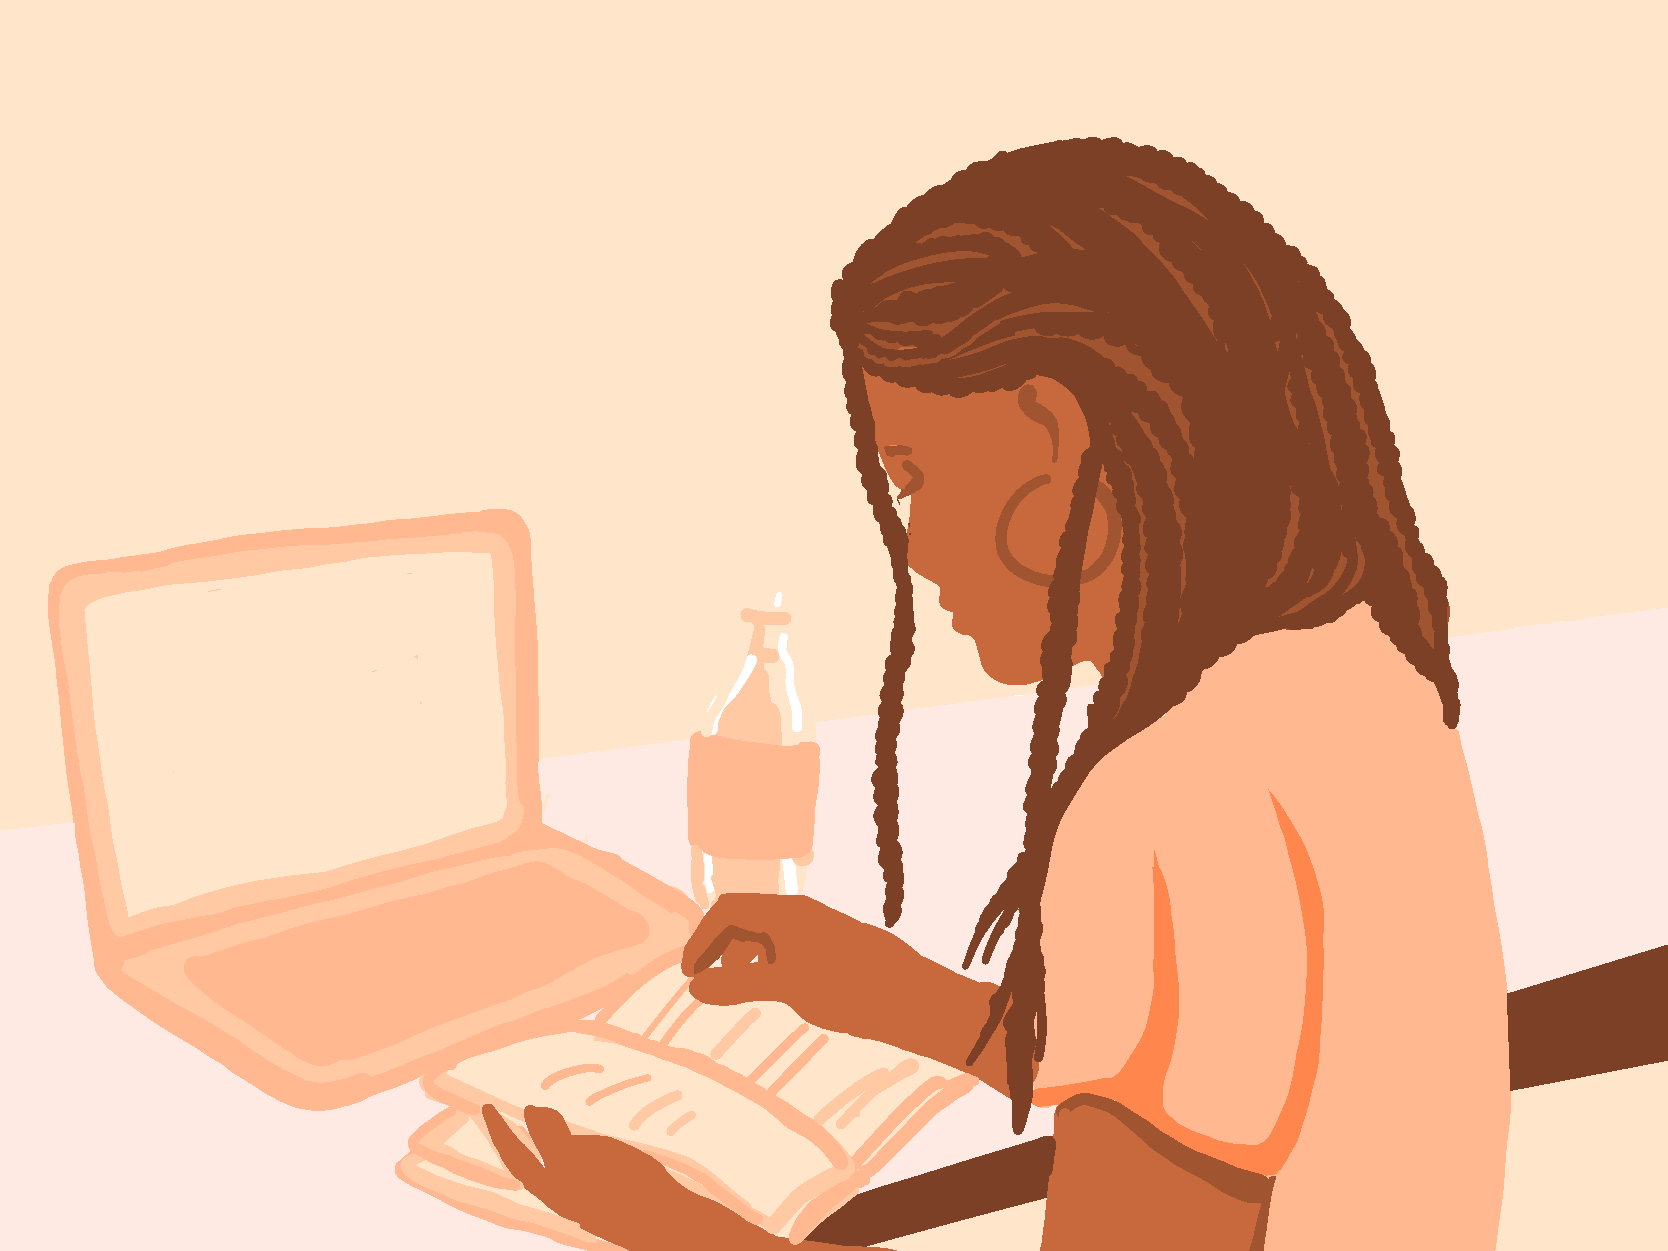 Black woman with braids working at a desk with laptop, notebook, and water bottle